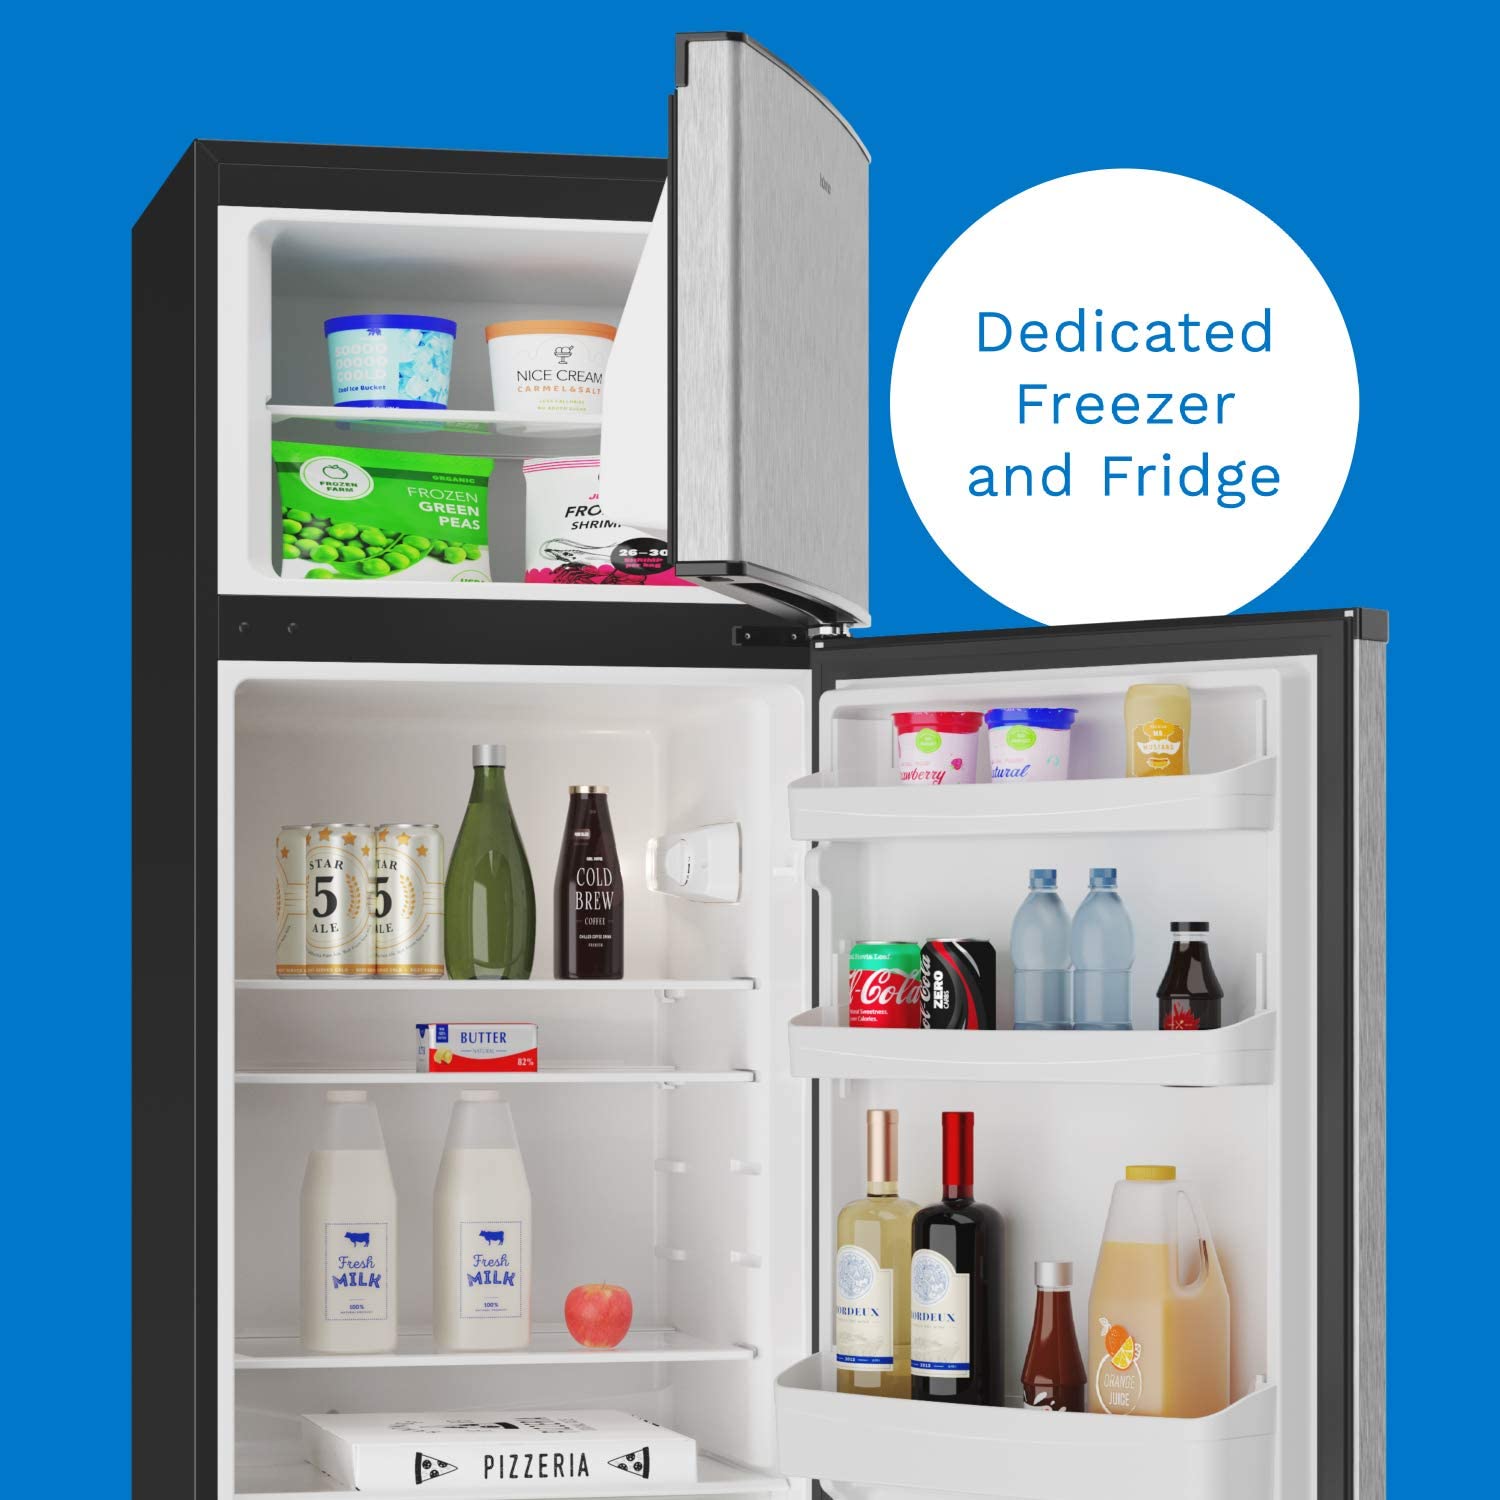 10 BEST APARTMENT SIZE REFRIGERATOR 2022 REVIEW: Tall Narrow Slim Fridge Freezer All In One Cooling Gear Lab: Any Refrigerators Air Conditioners Freezers Ice Makers Coolers Fans Reviewed And Compared.